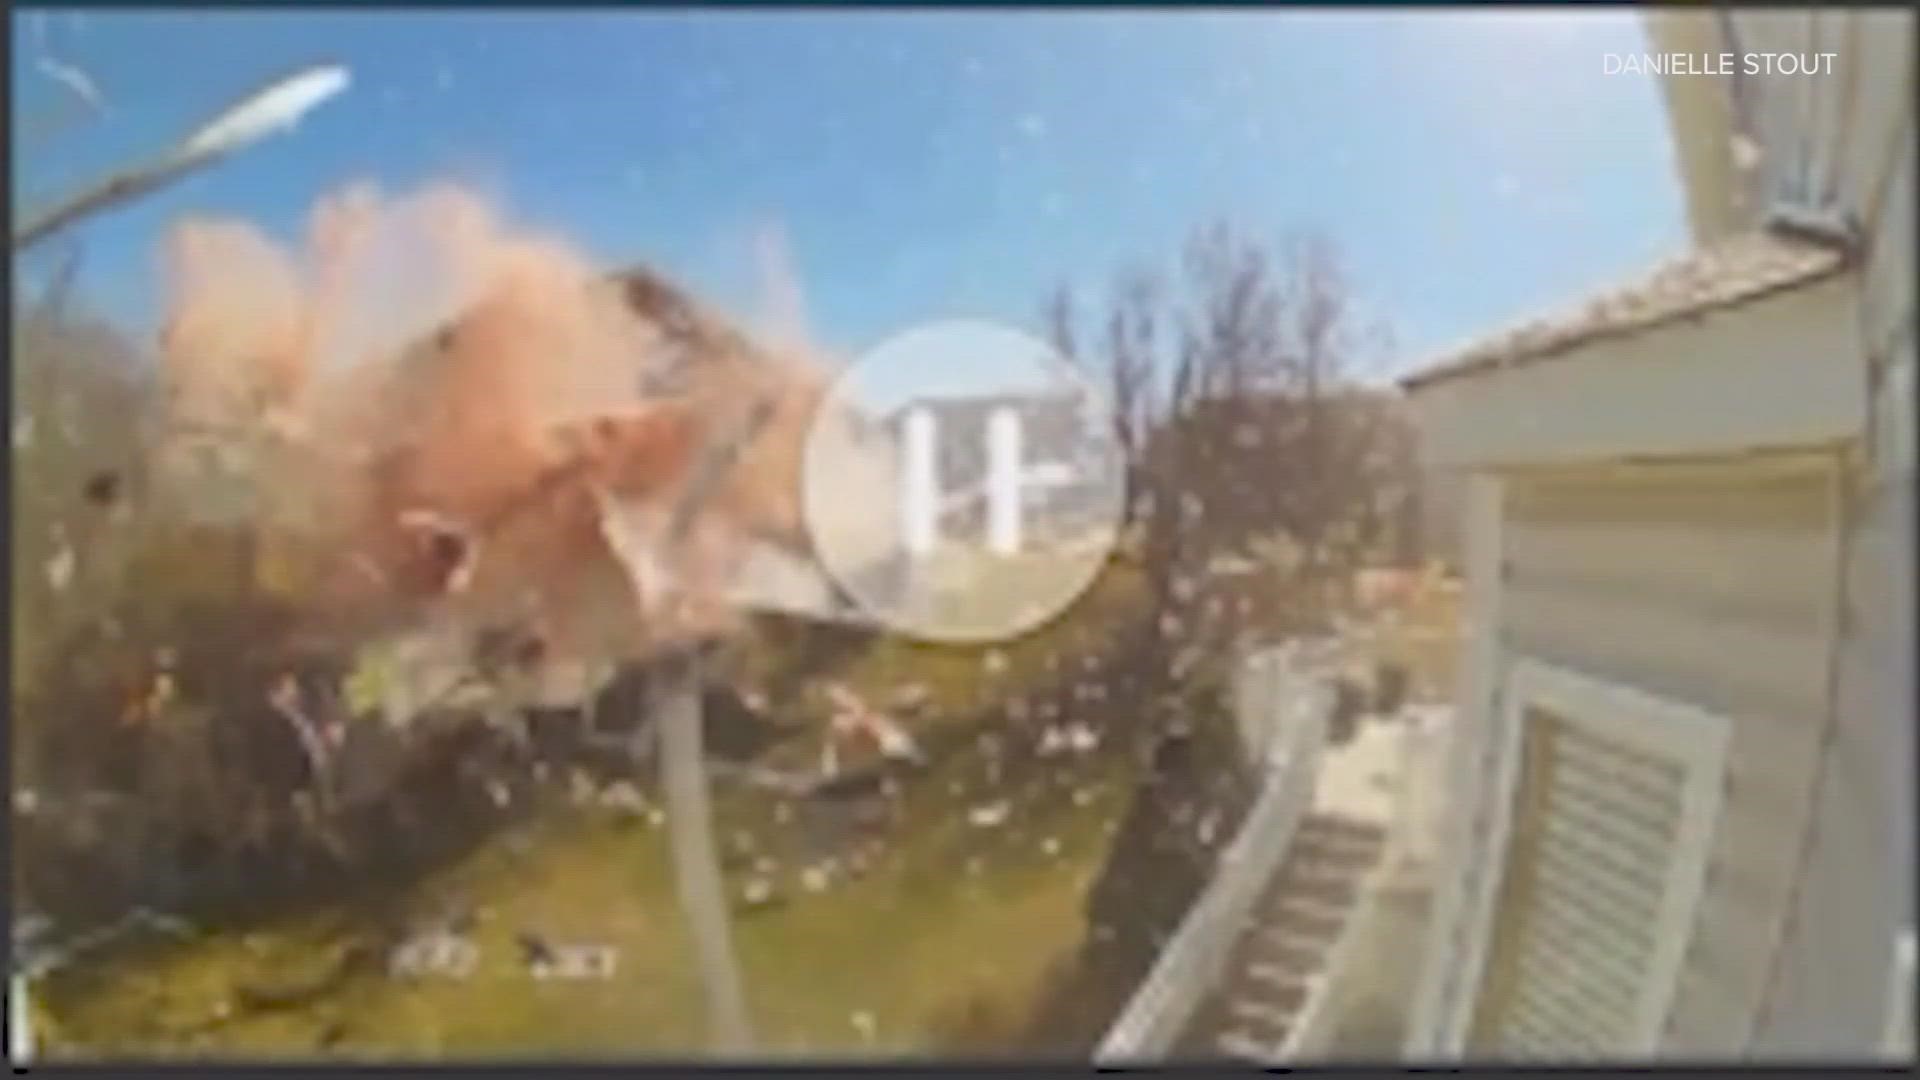 The family escaped and no one was injured in the explosion. A neighbor's camera captured the explosion on camera.